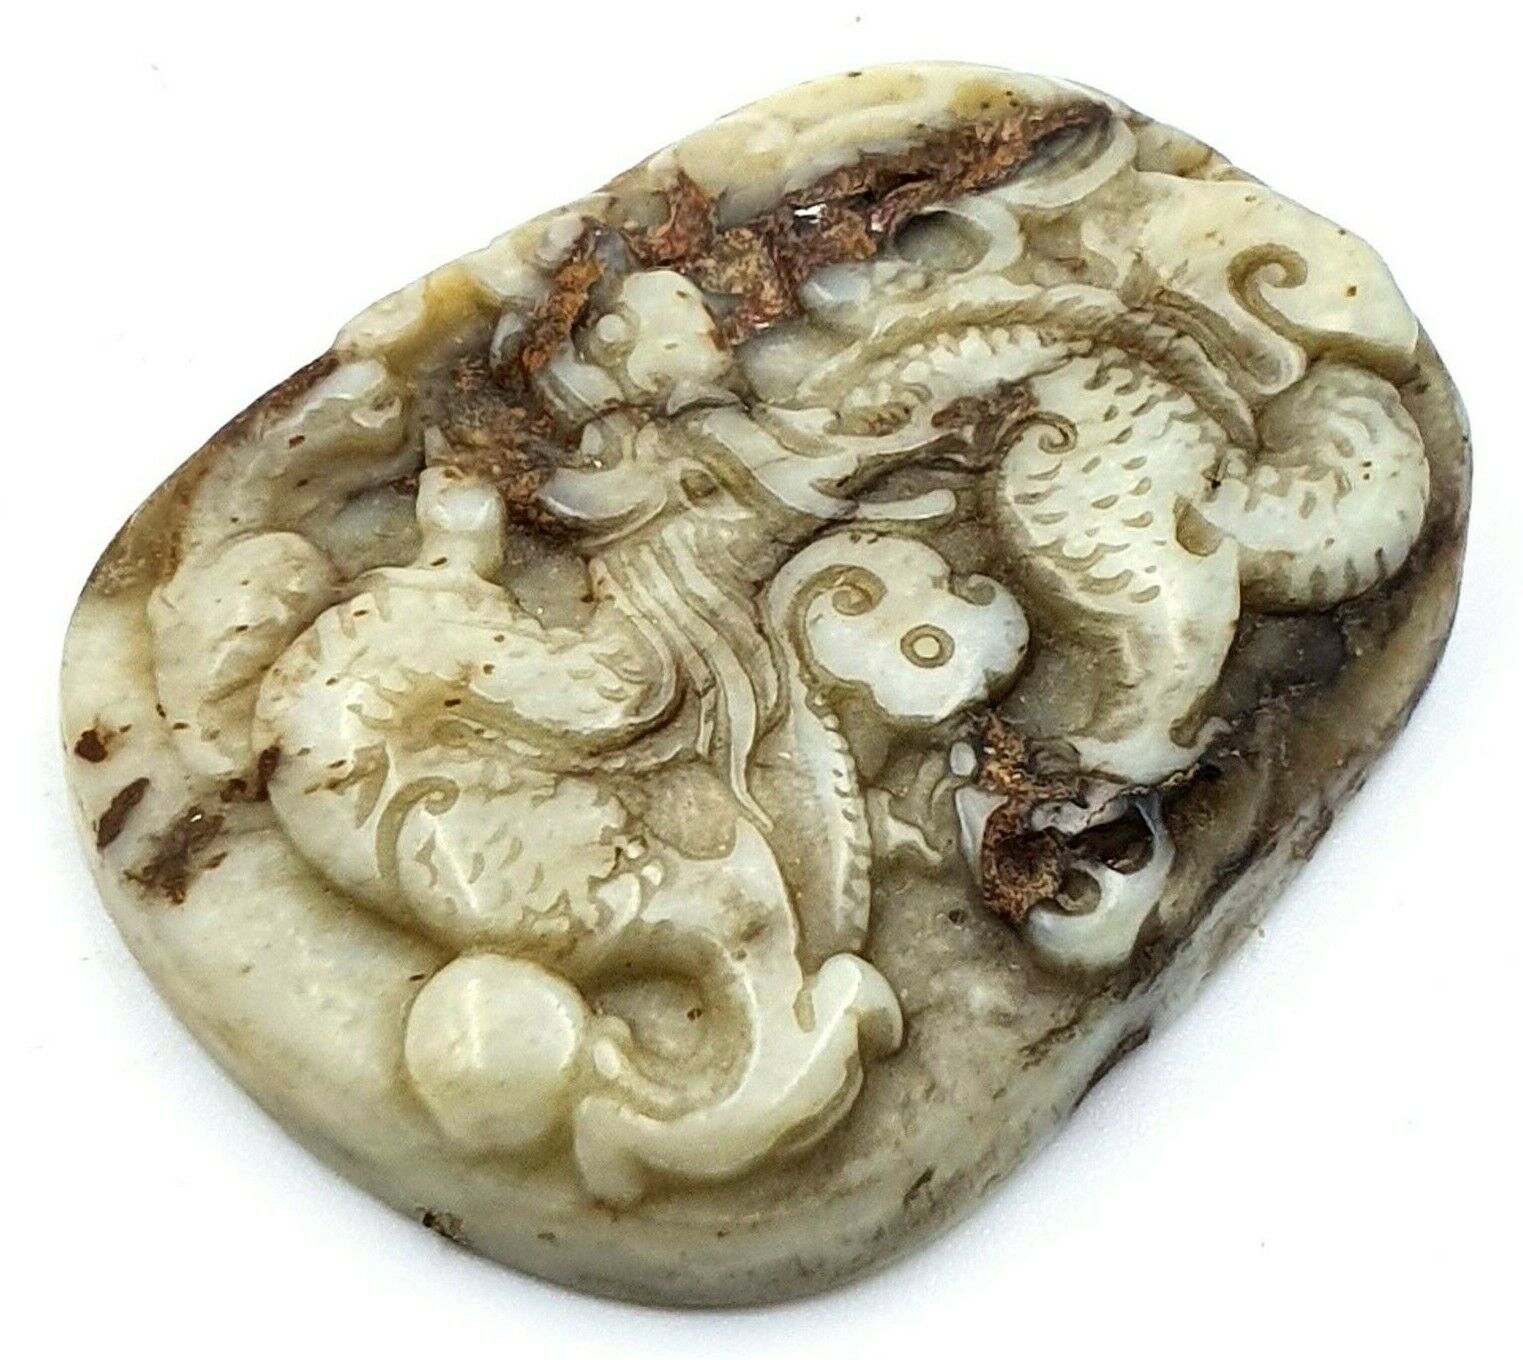 Beautiful Antique Chinese marble carved dragon pendant - 2" x 1.5" x 0.25" - VGC